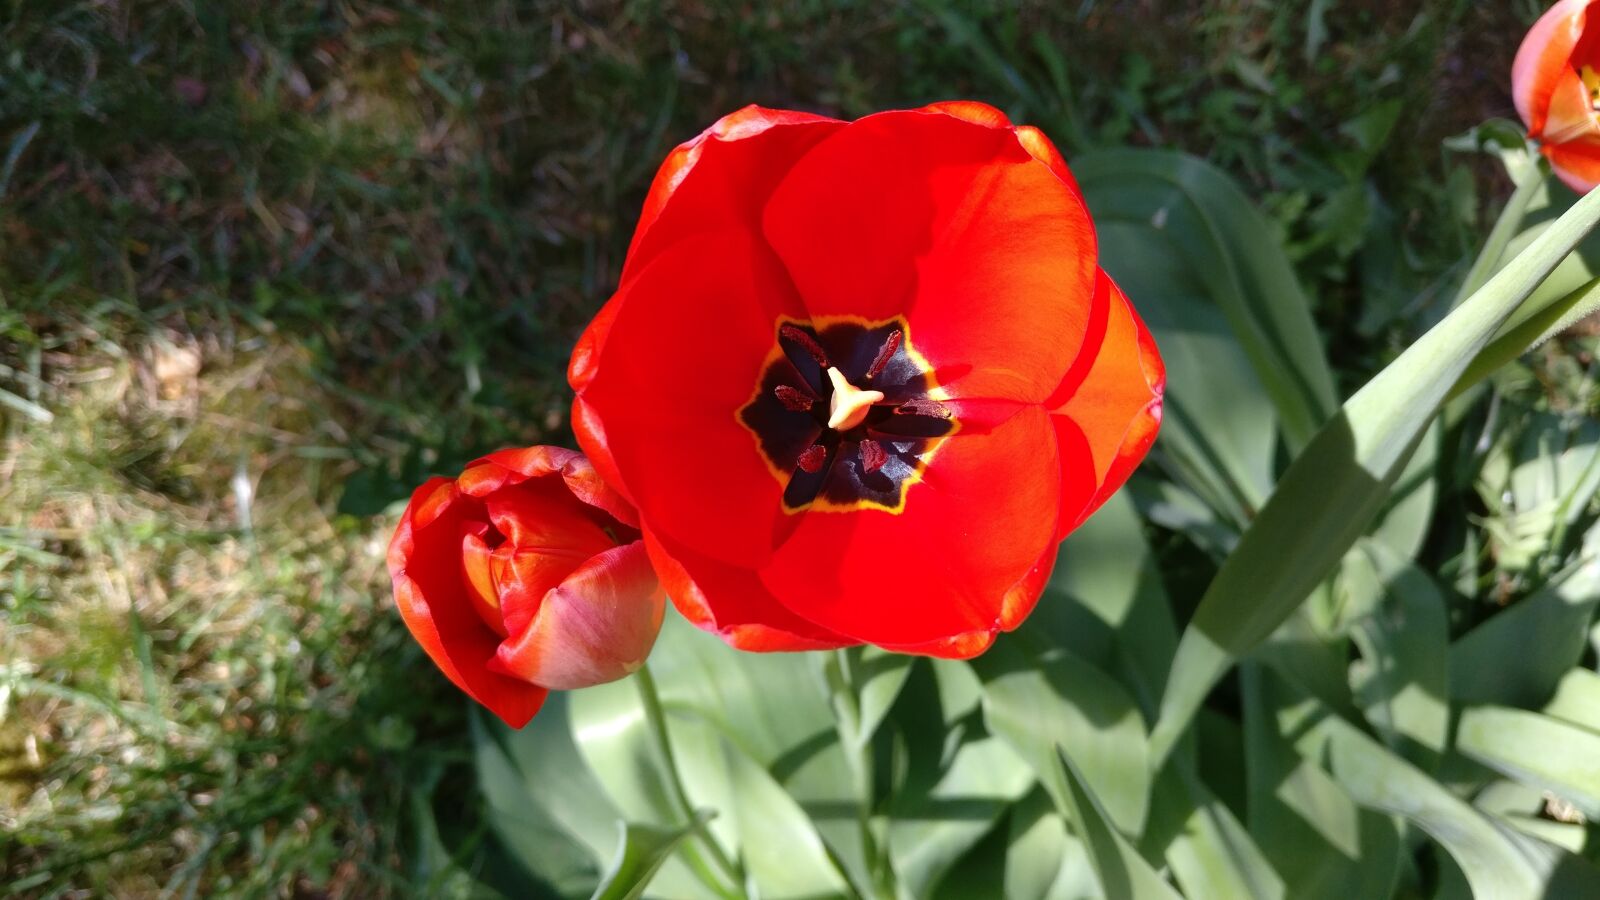 OnePlus A3003 sample photo. Tulip, flower, tulips photography